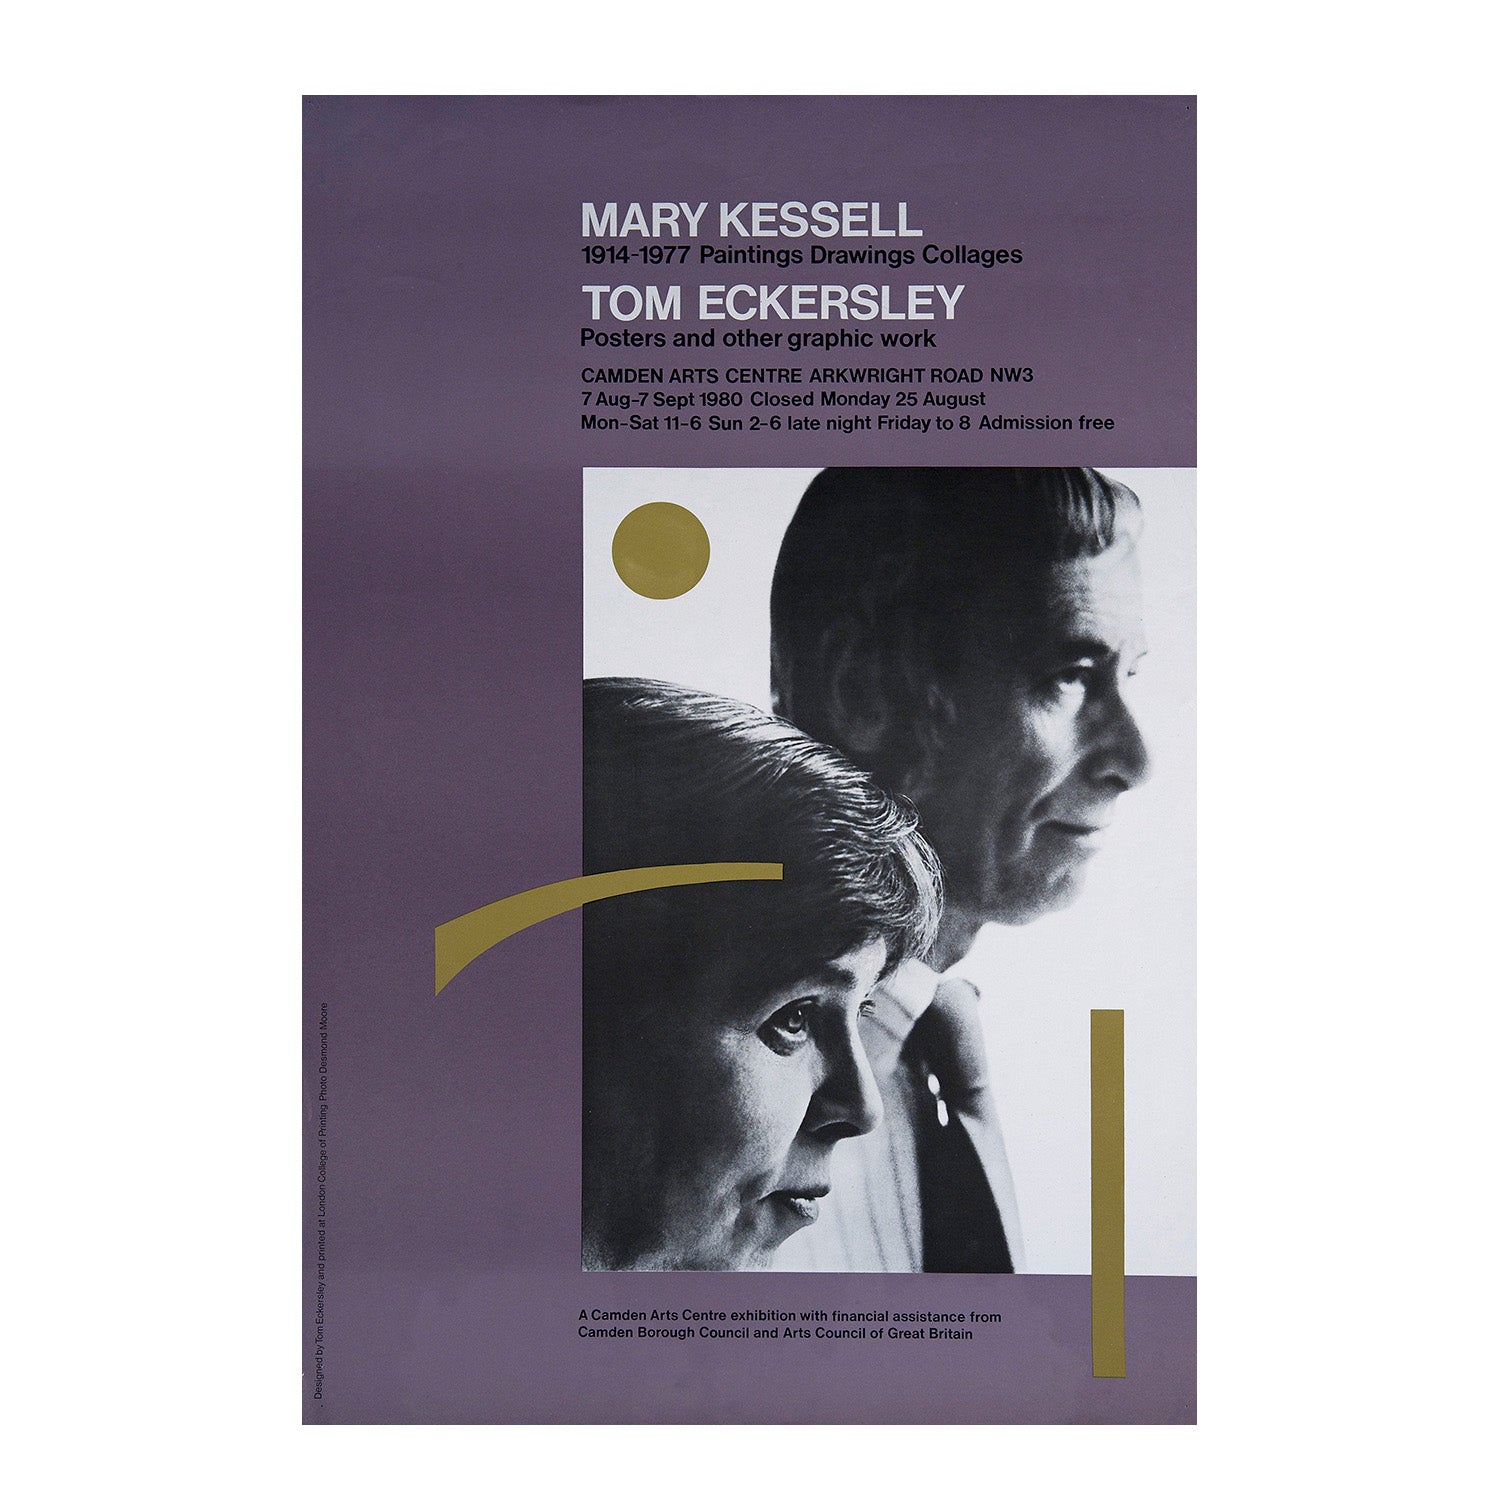 Mary Kessell 1914-1977 Paintings Drawings Collages. Tom Eckersley Posters and other graphic works